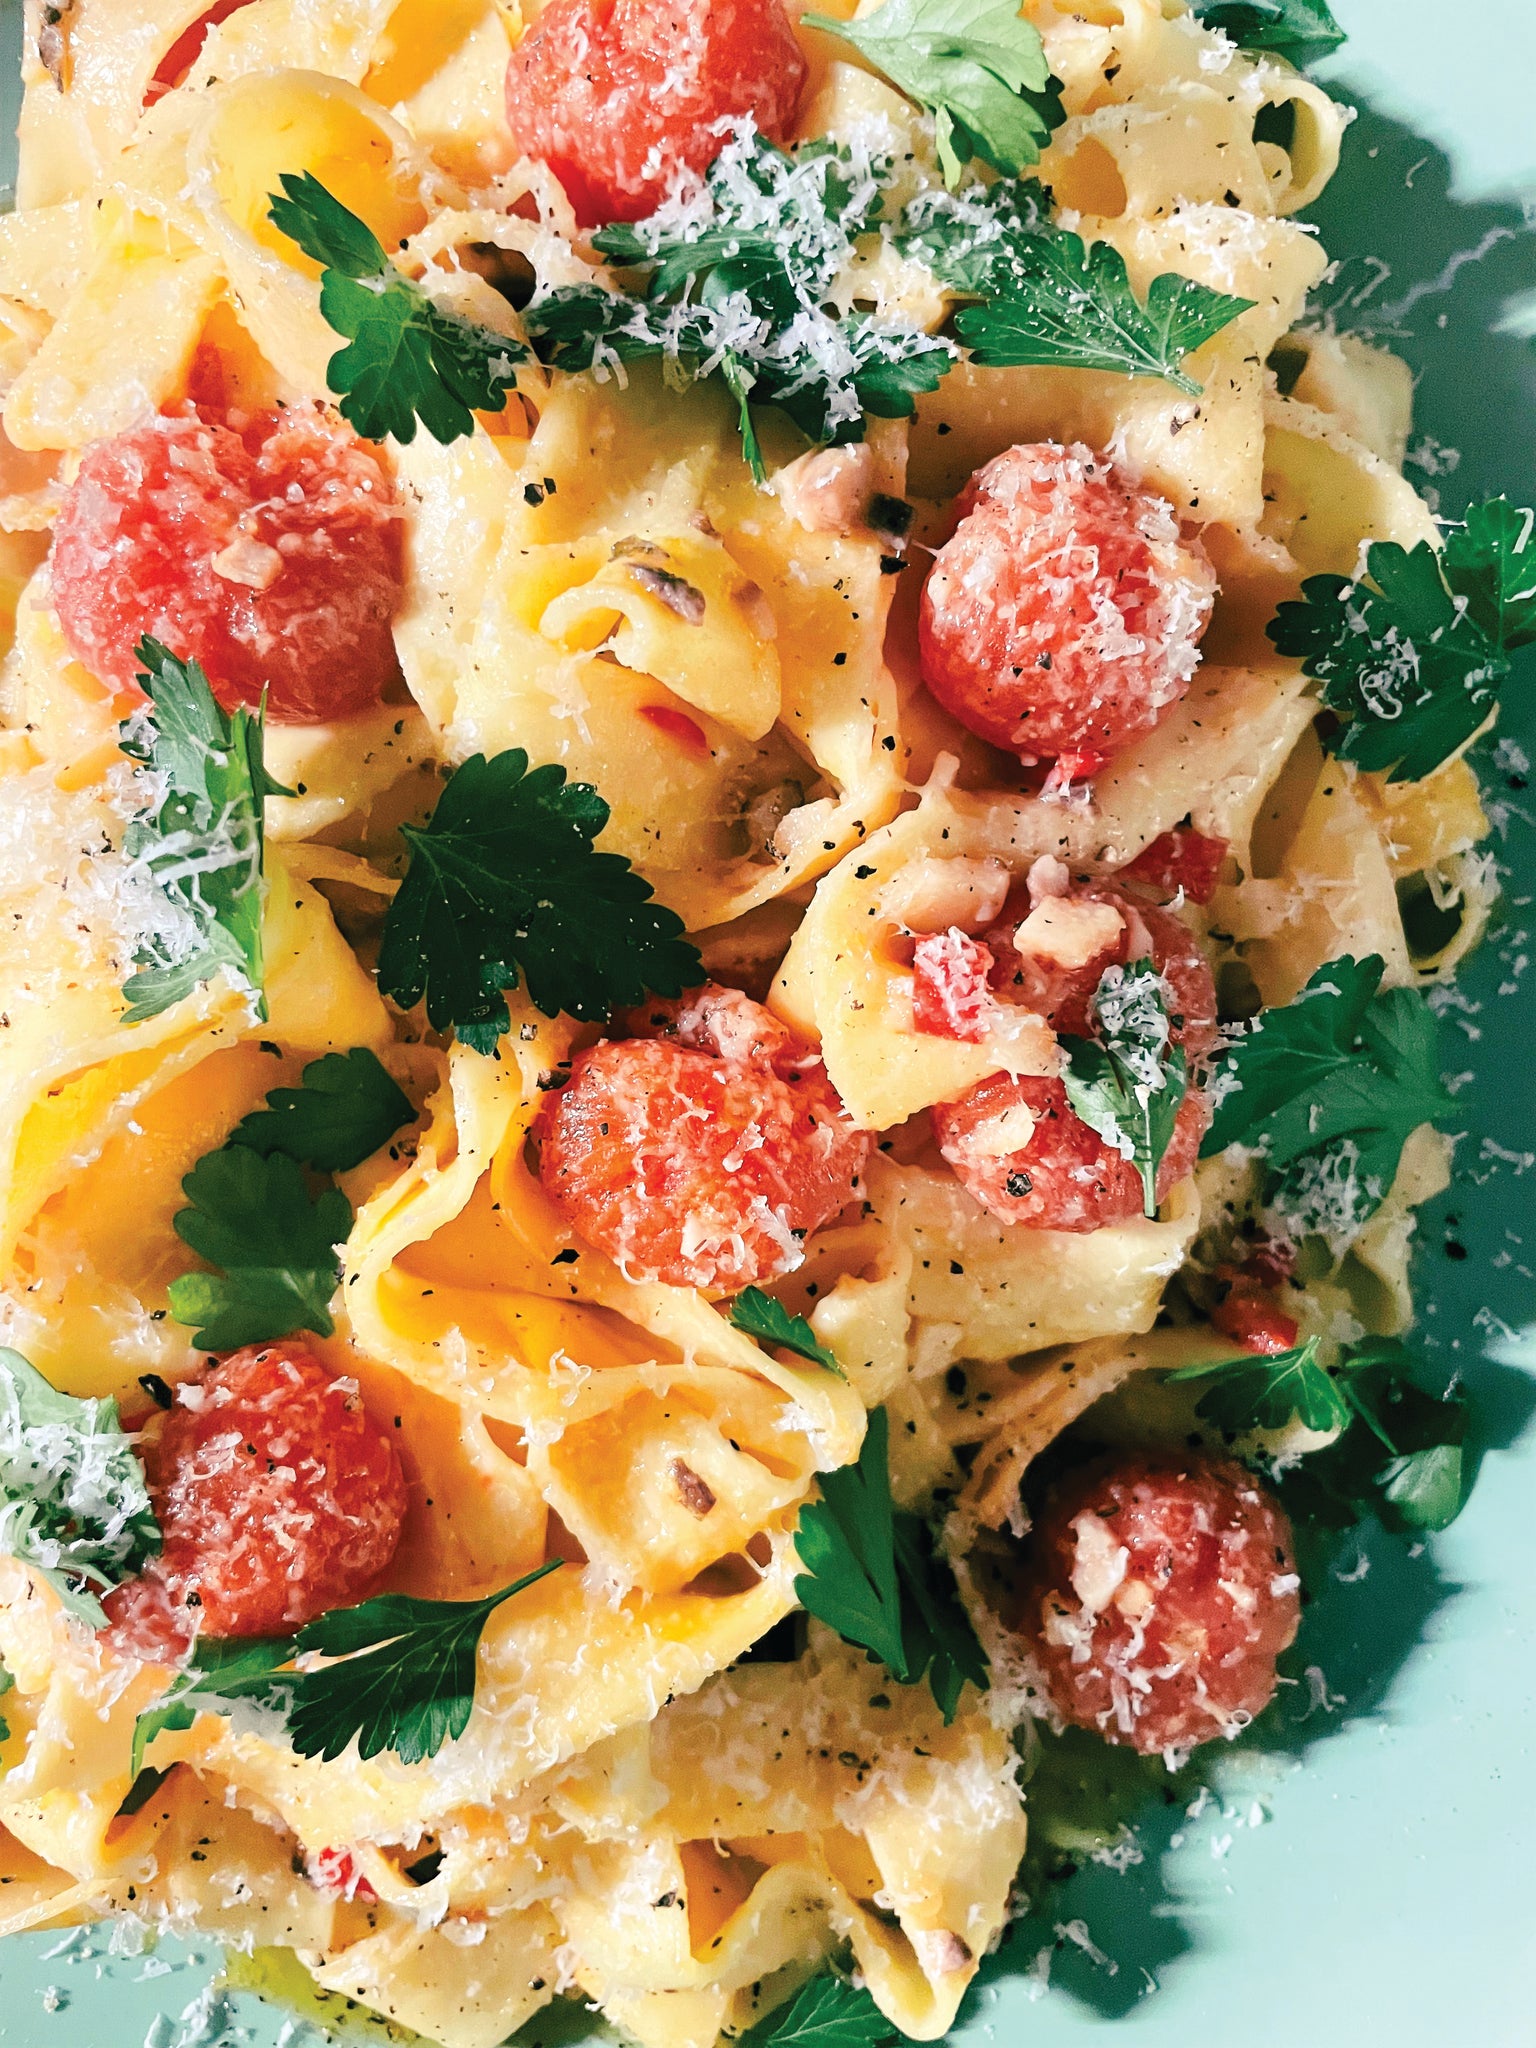 Anchovy & cherry tomato pappardelle